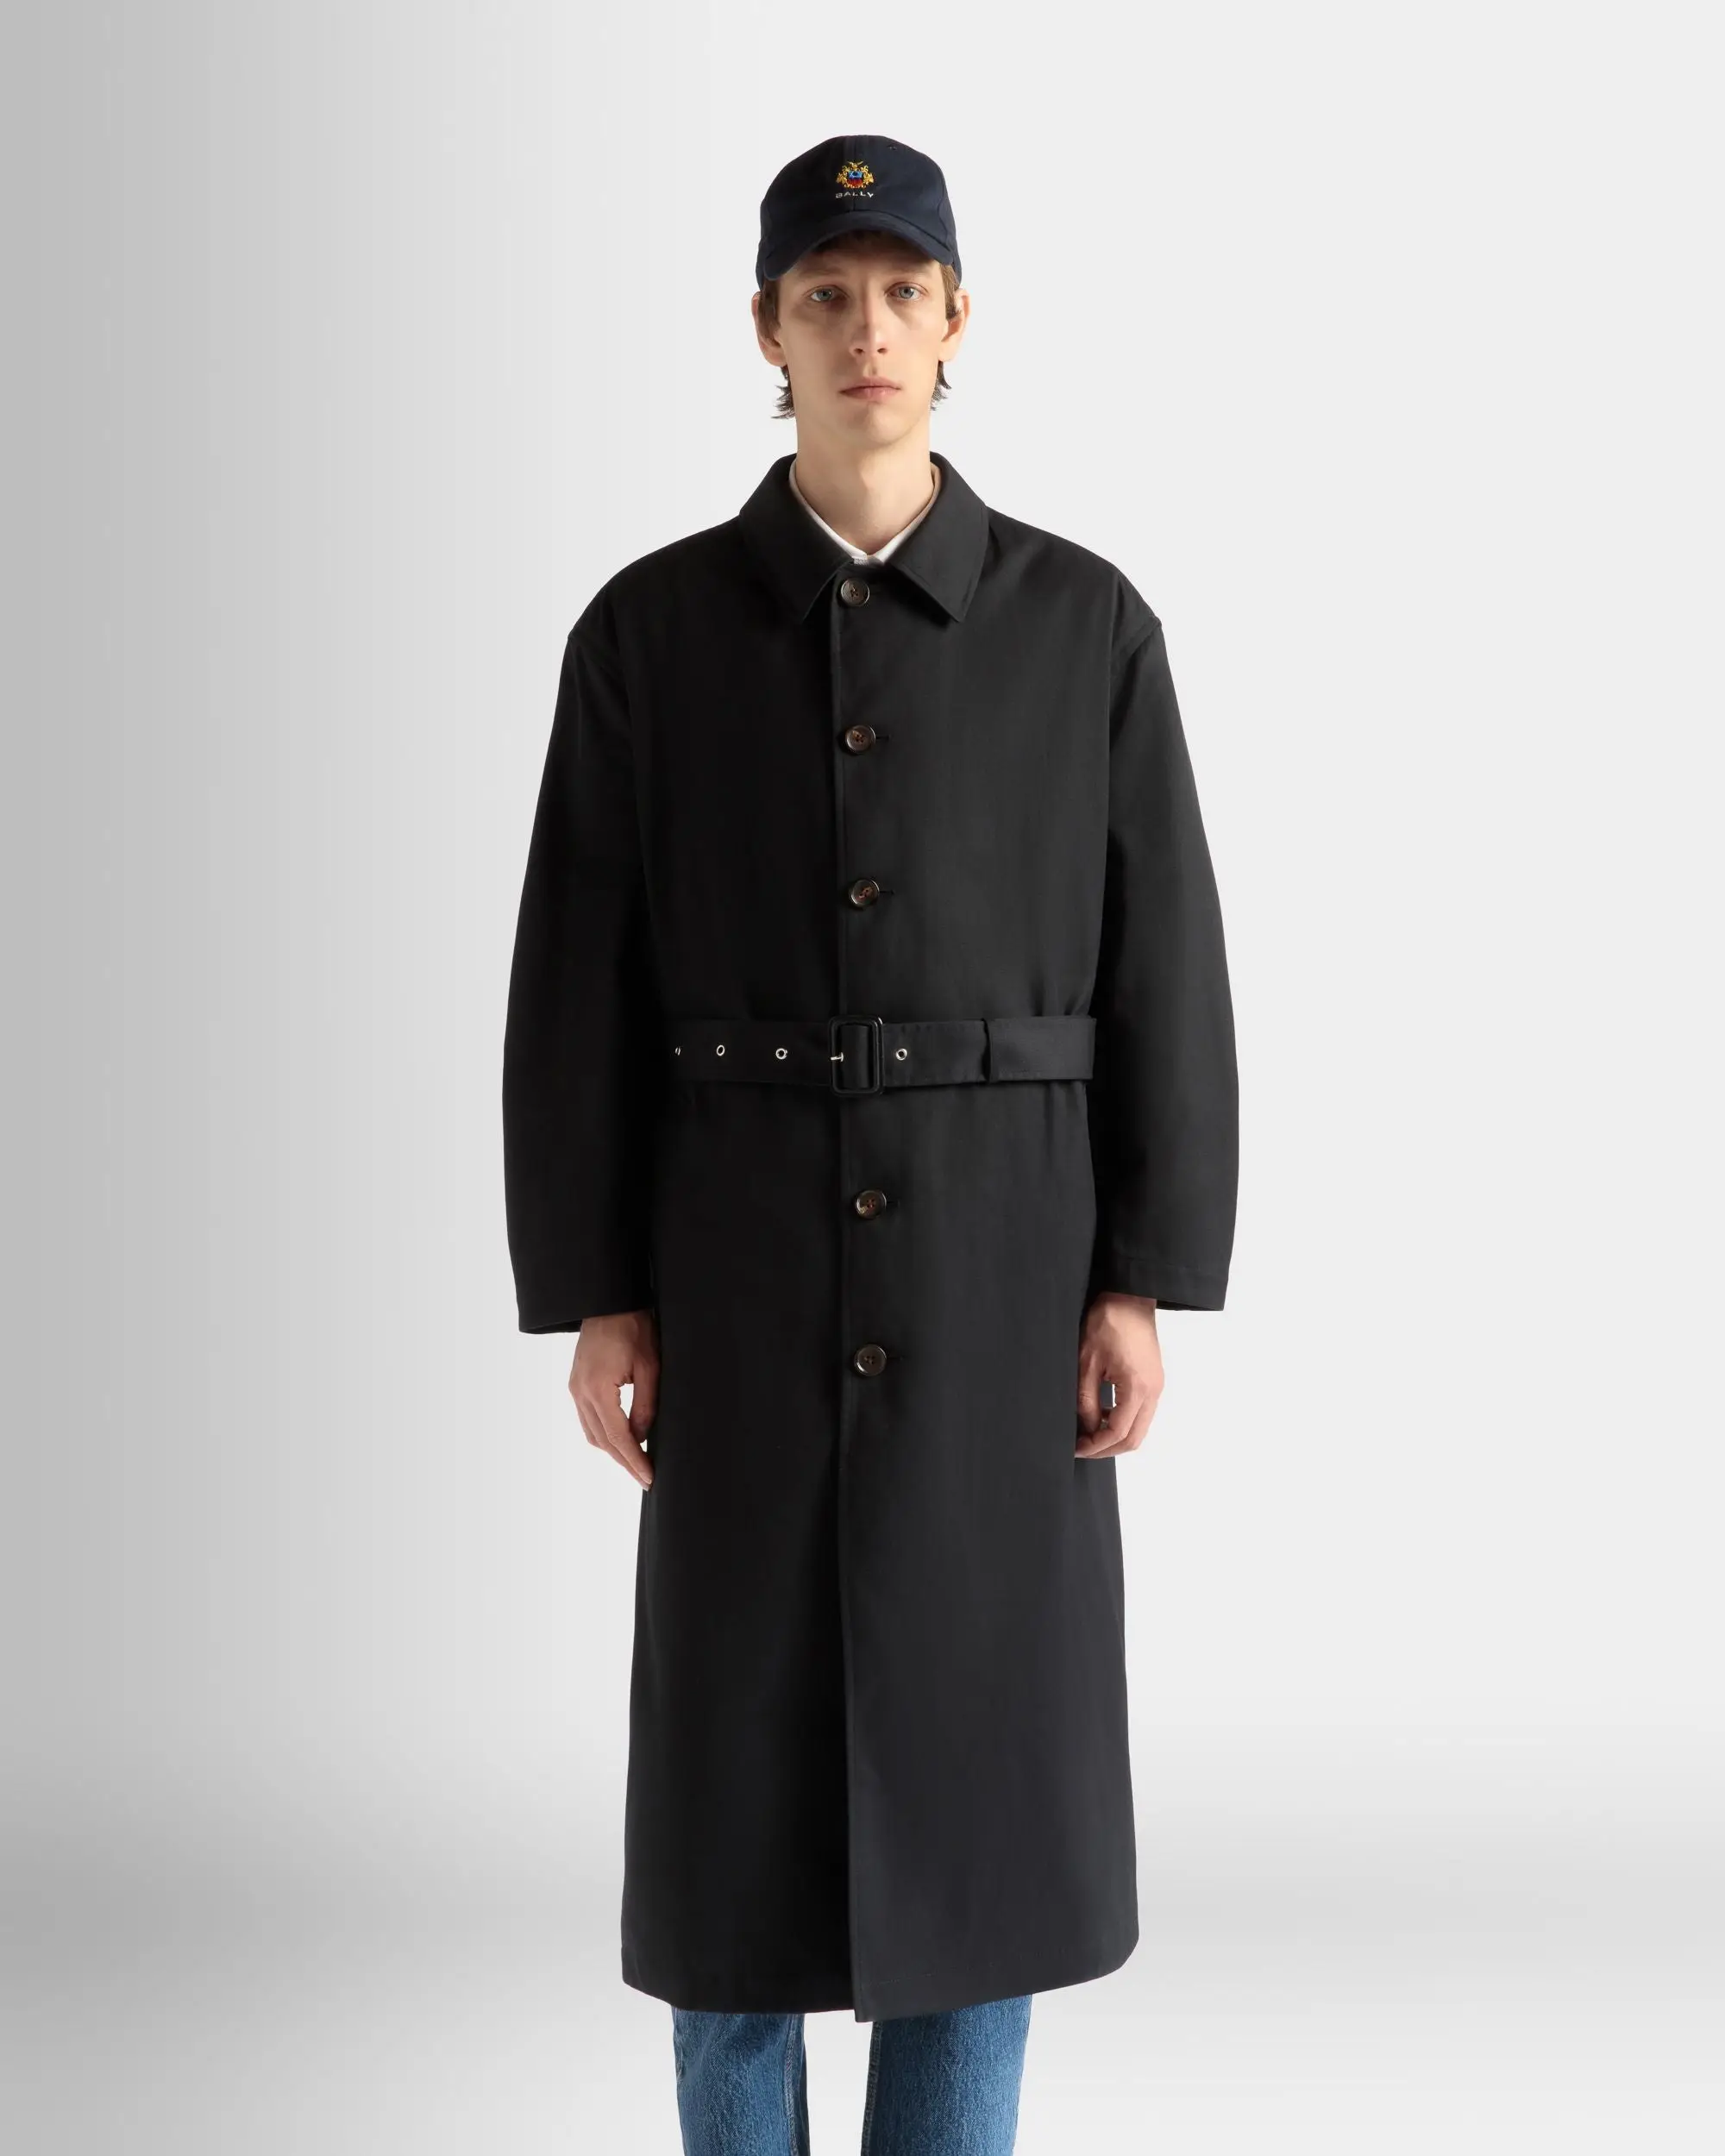 Trench Coat in Navy Blue Mix Cotton